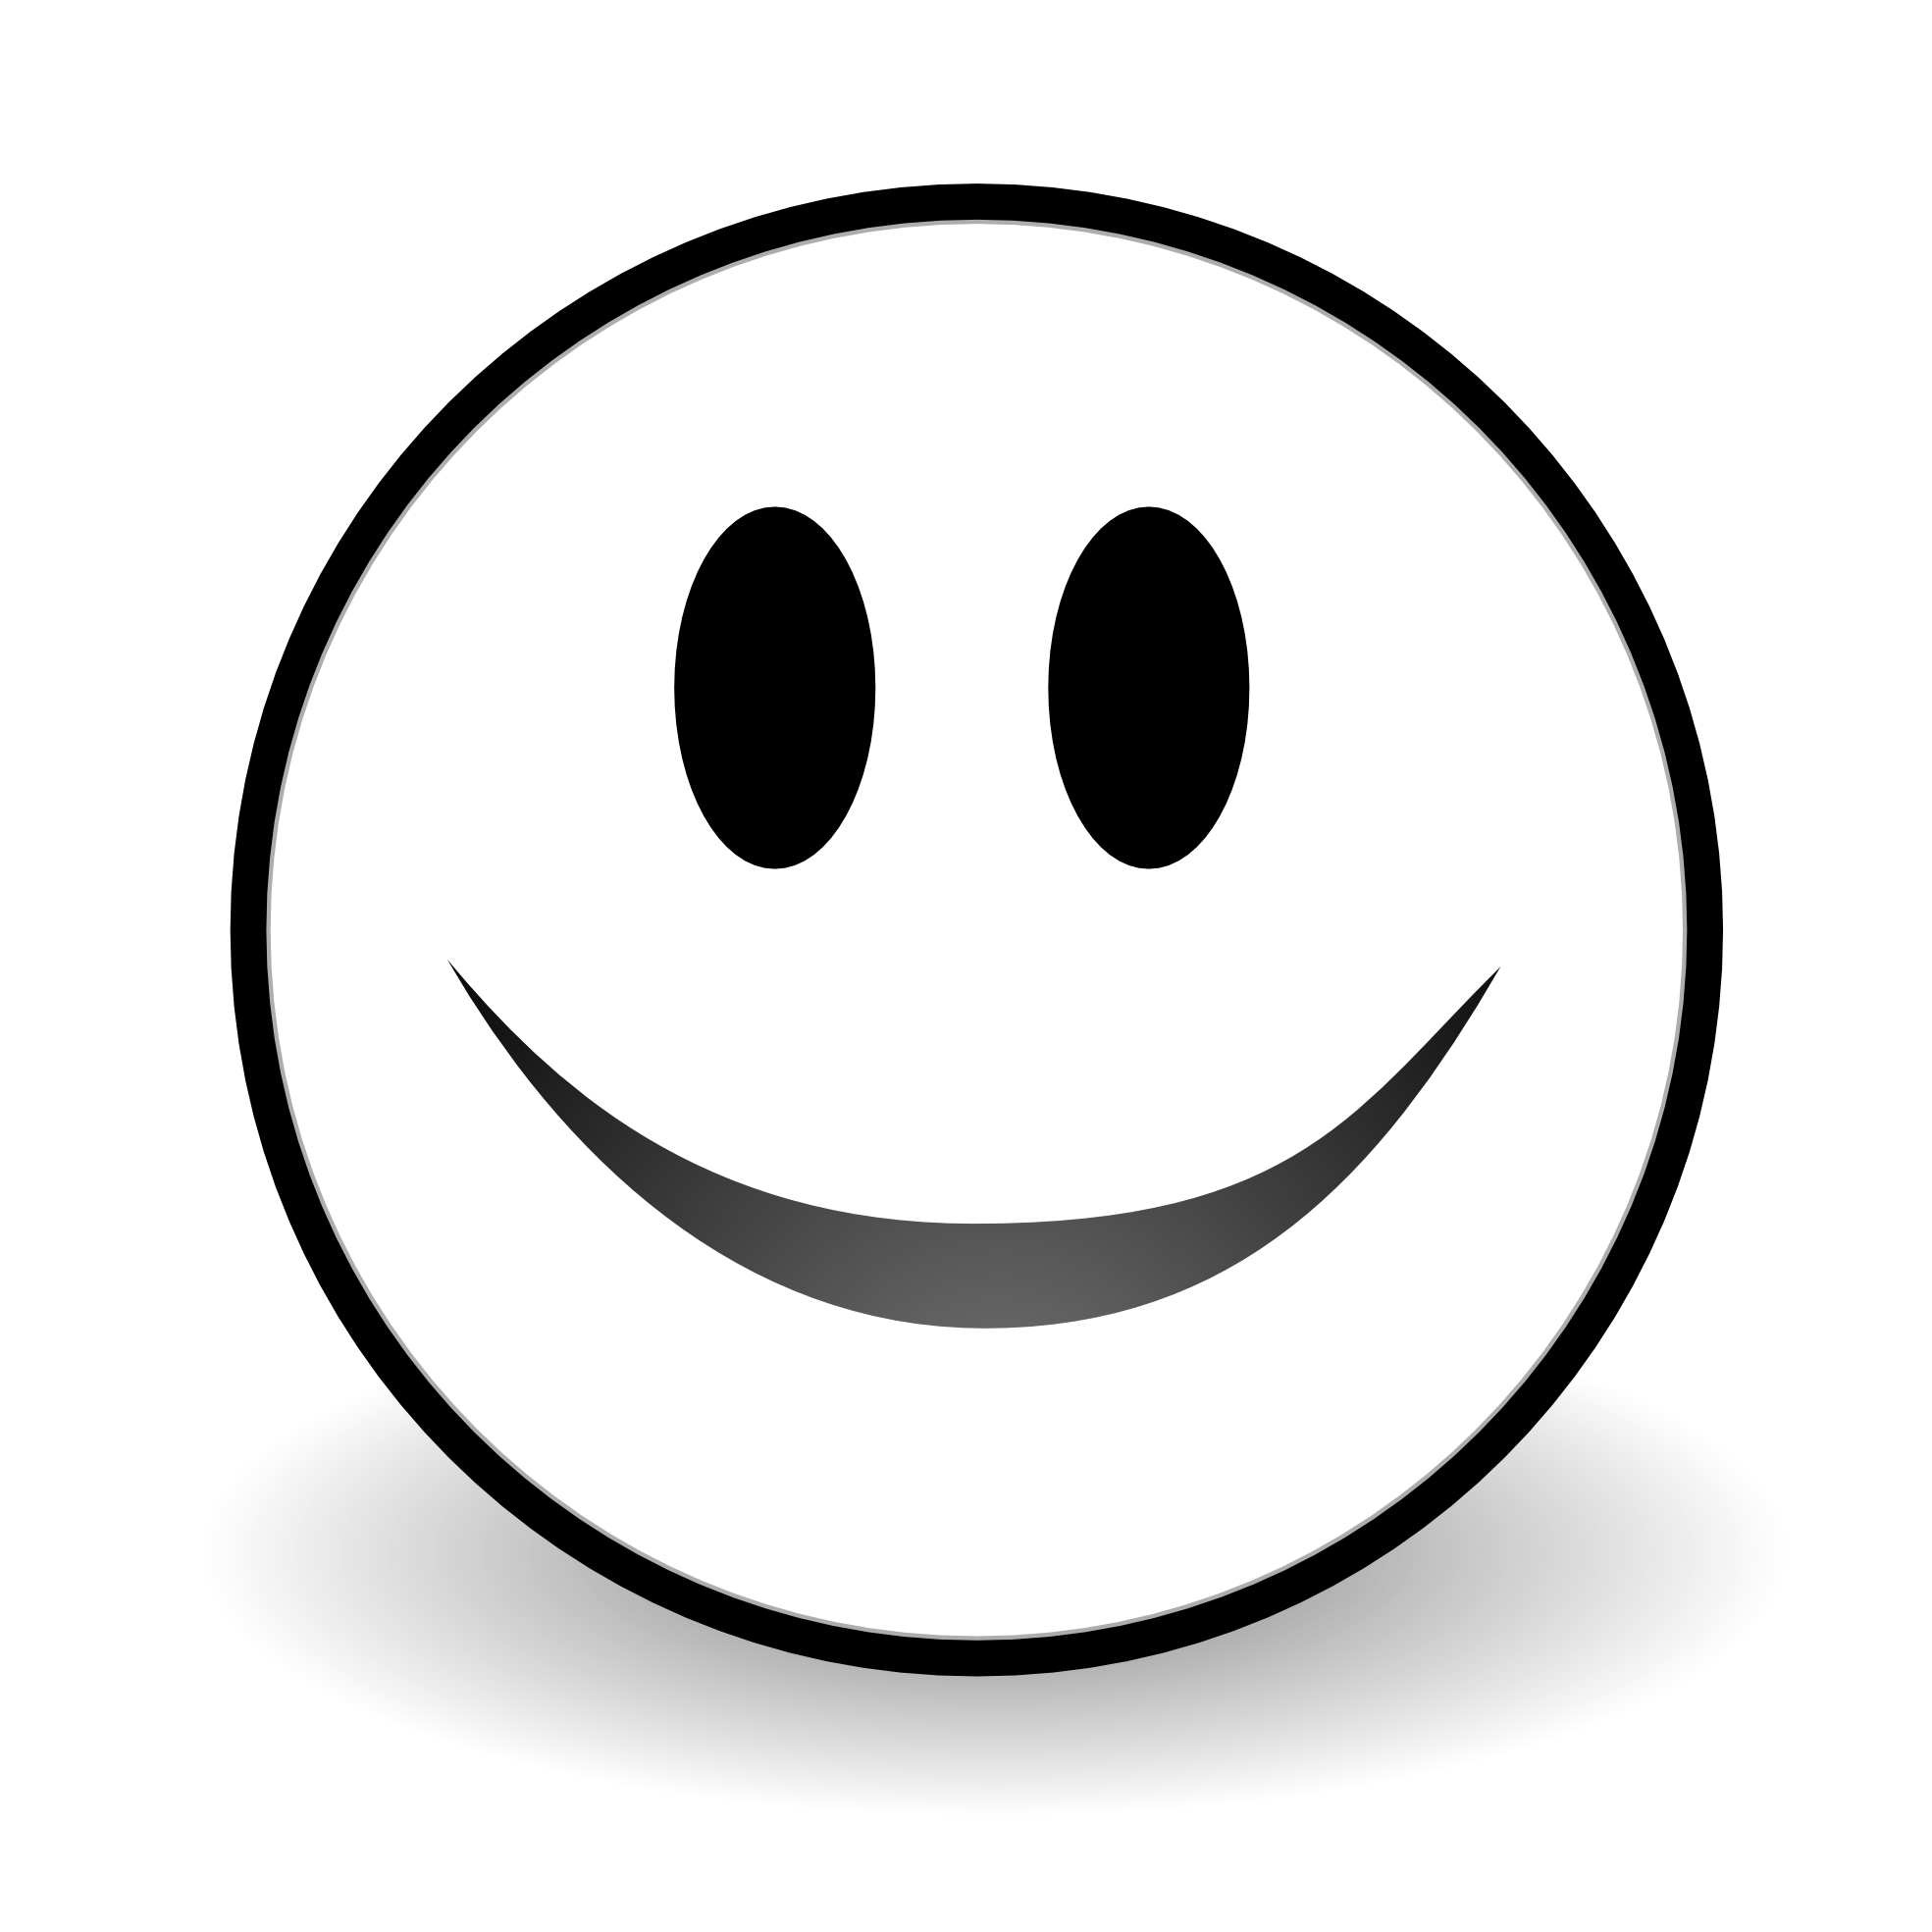 Smile clipart black and white free clipart images 2